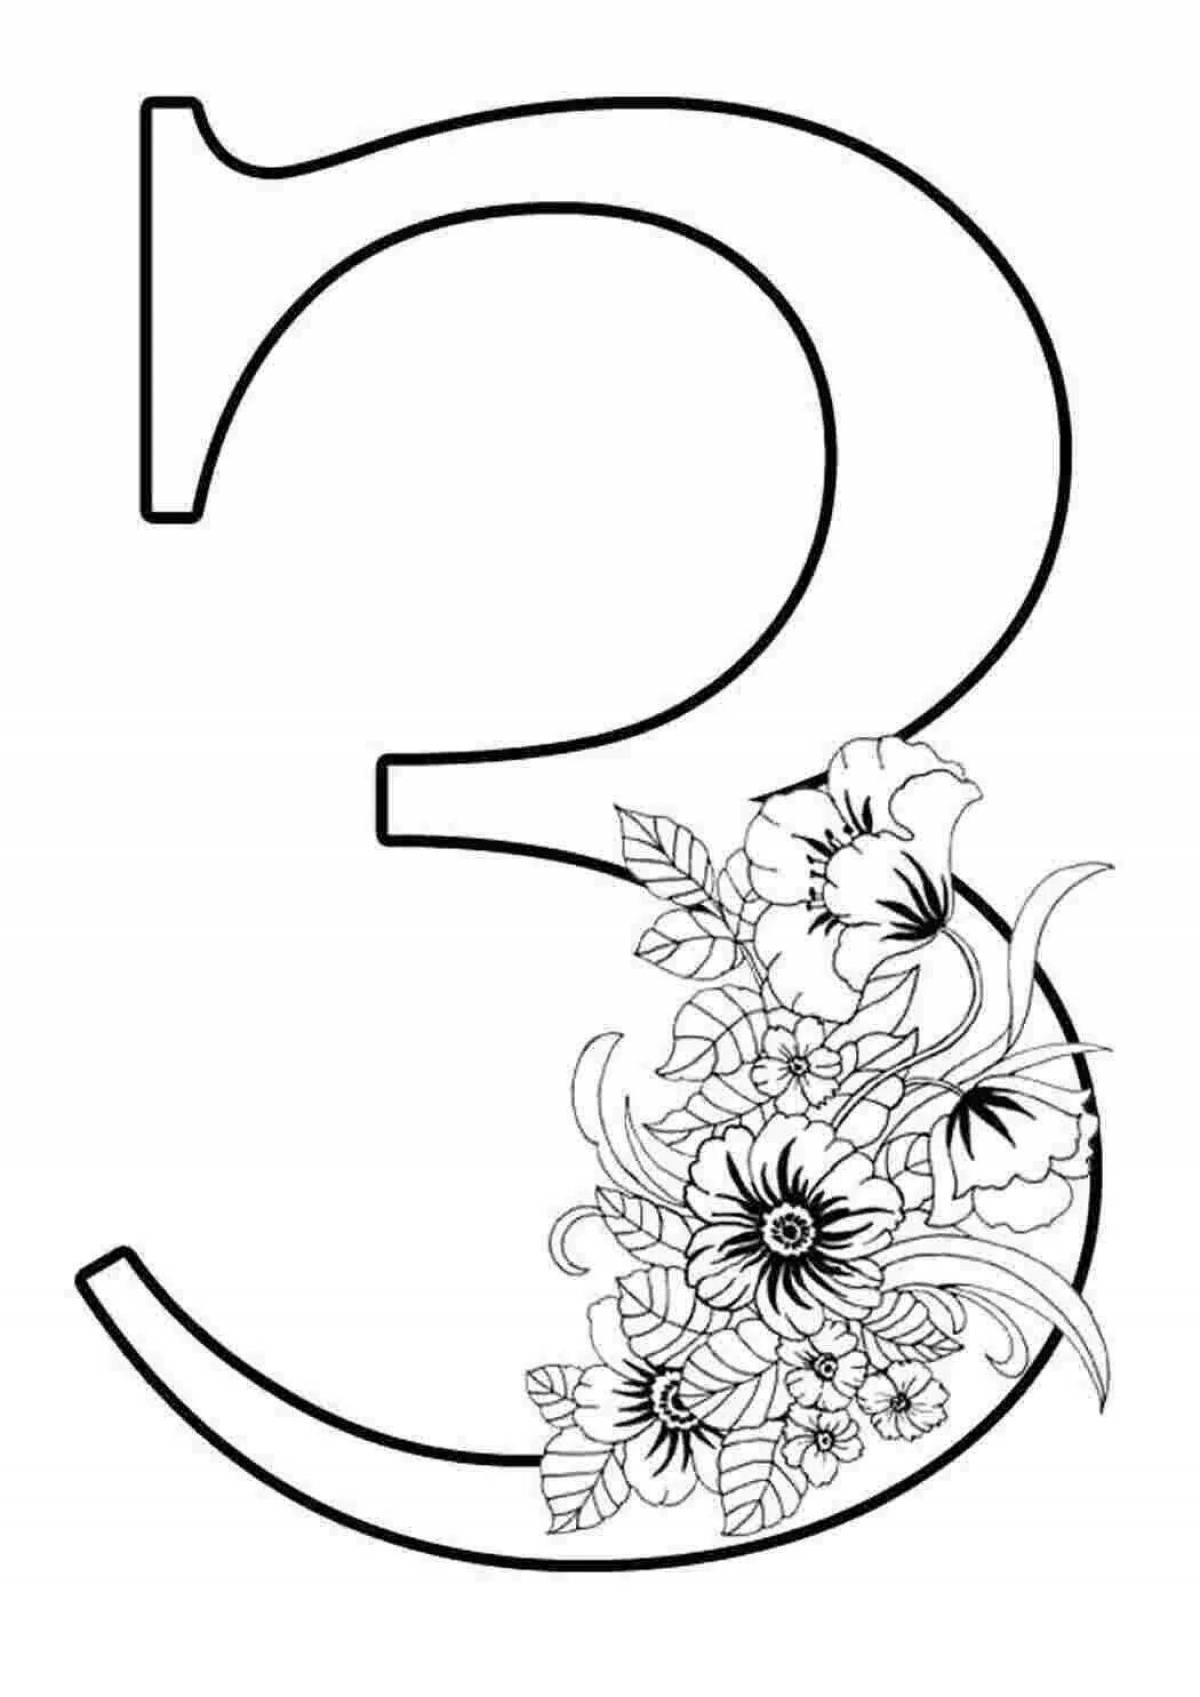 Delightful letter c with flowers